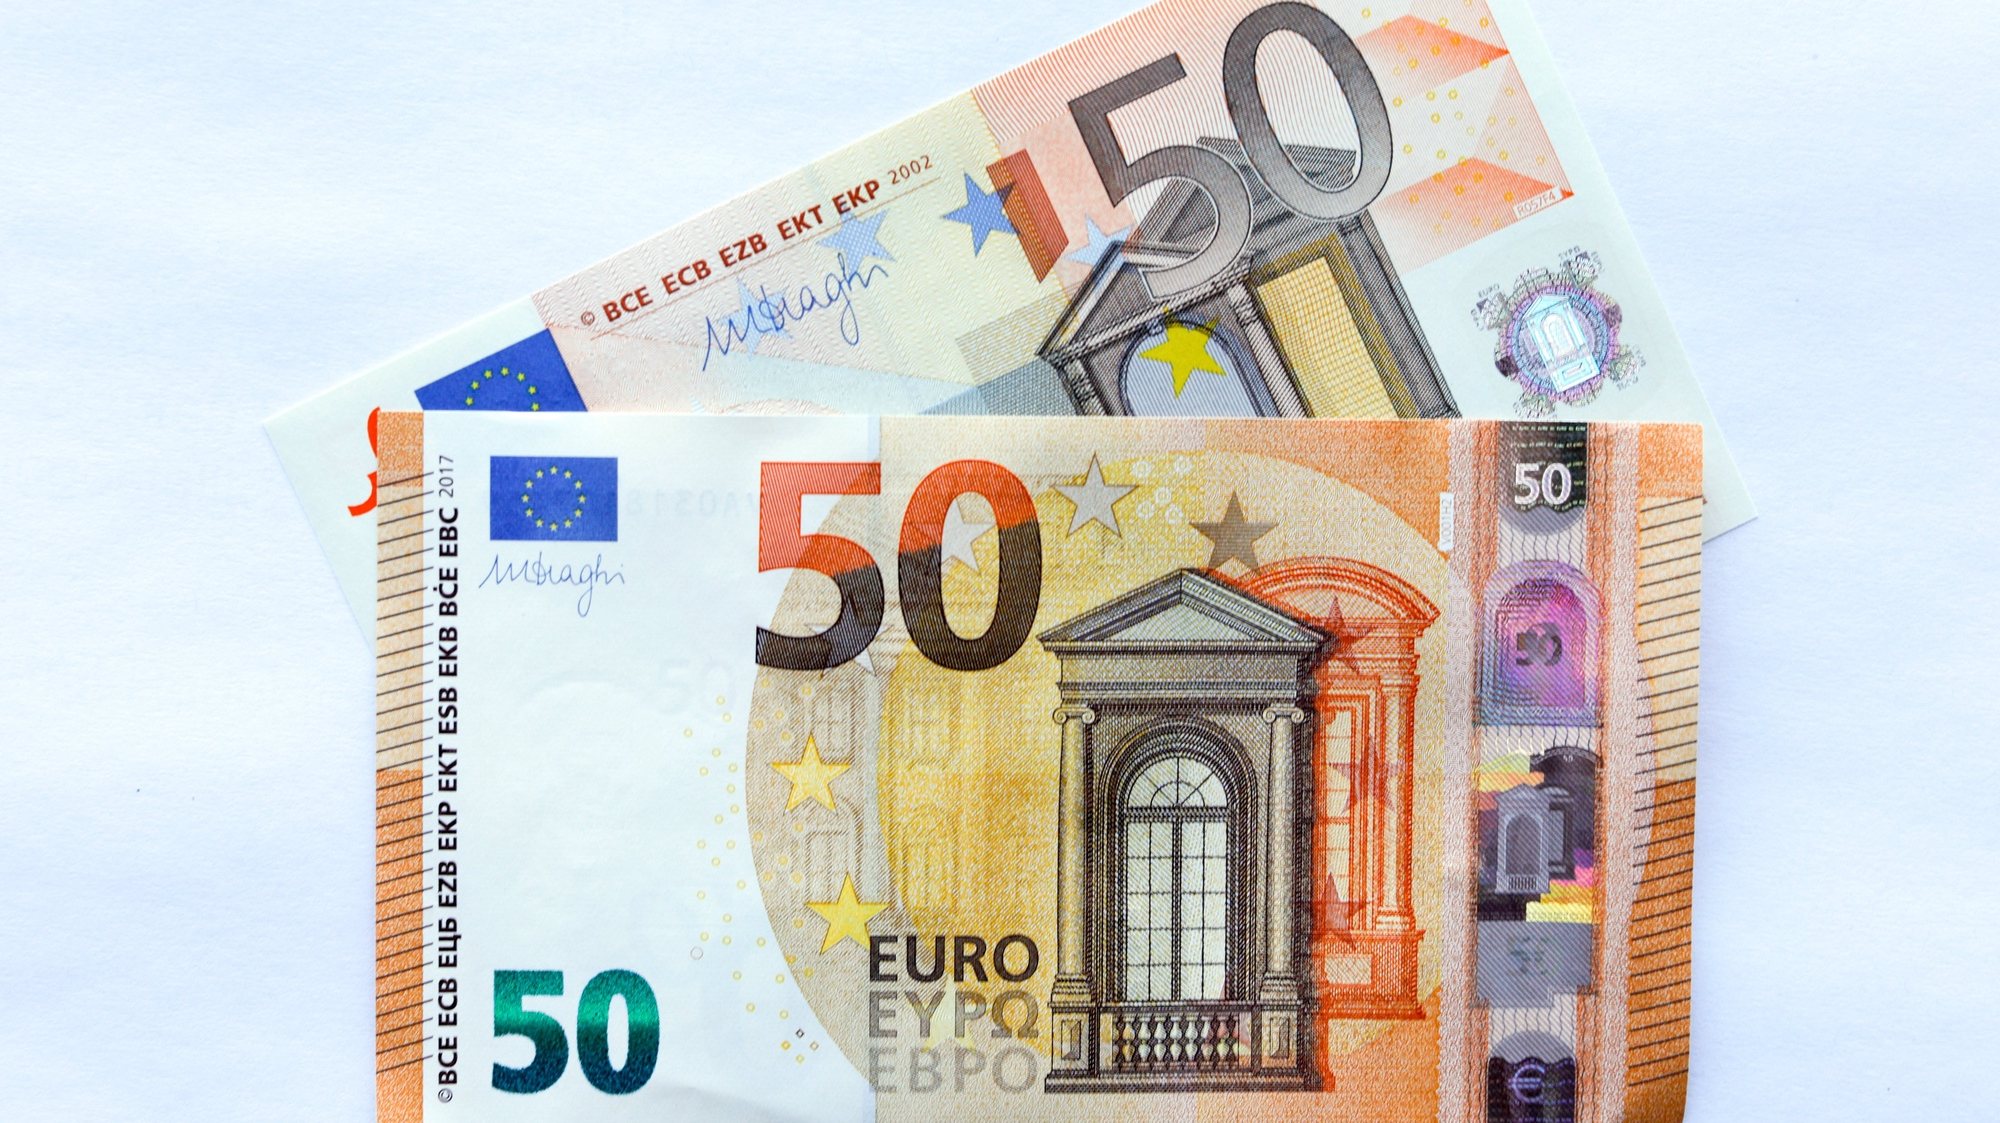 epa05851608 A current (top) a new (bottom) 50 Euro banknotes during a presentation of new 50 Euro banknotes in the German Federal Bank (Bundesbank) headquarters in Frankfurt am Main, Germany, 16 March 2017. The new banknotes will enter circulation on 04 April 2017.  EPA/ALEXANDER BECHER